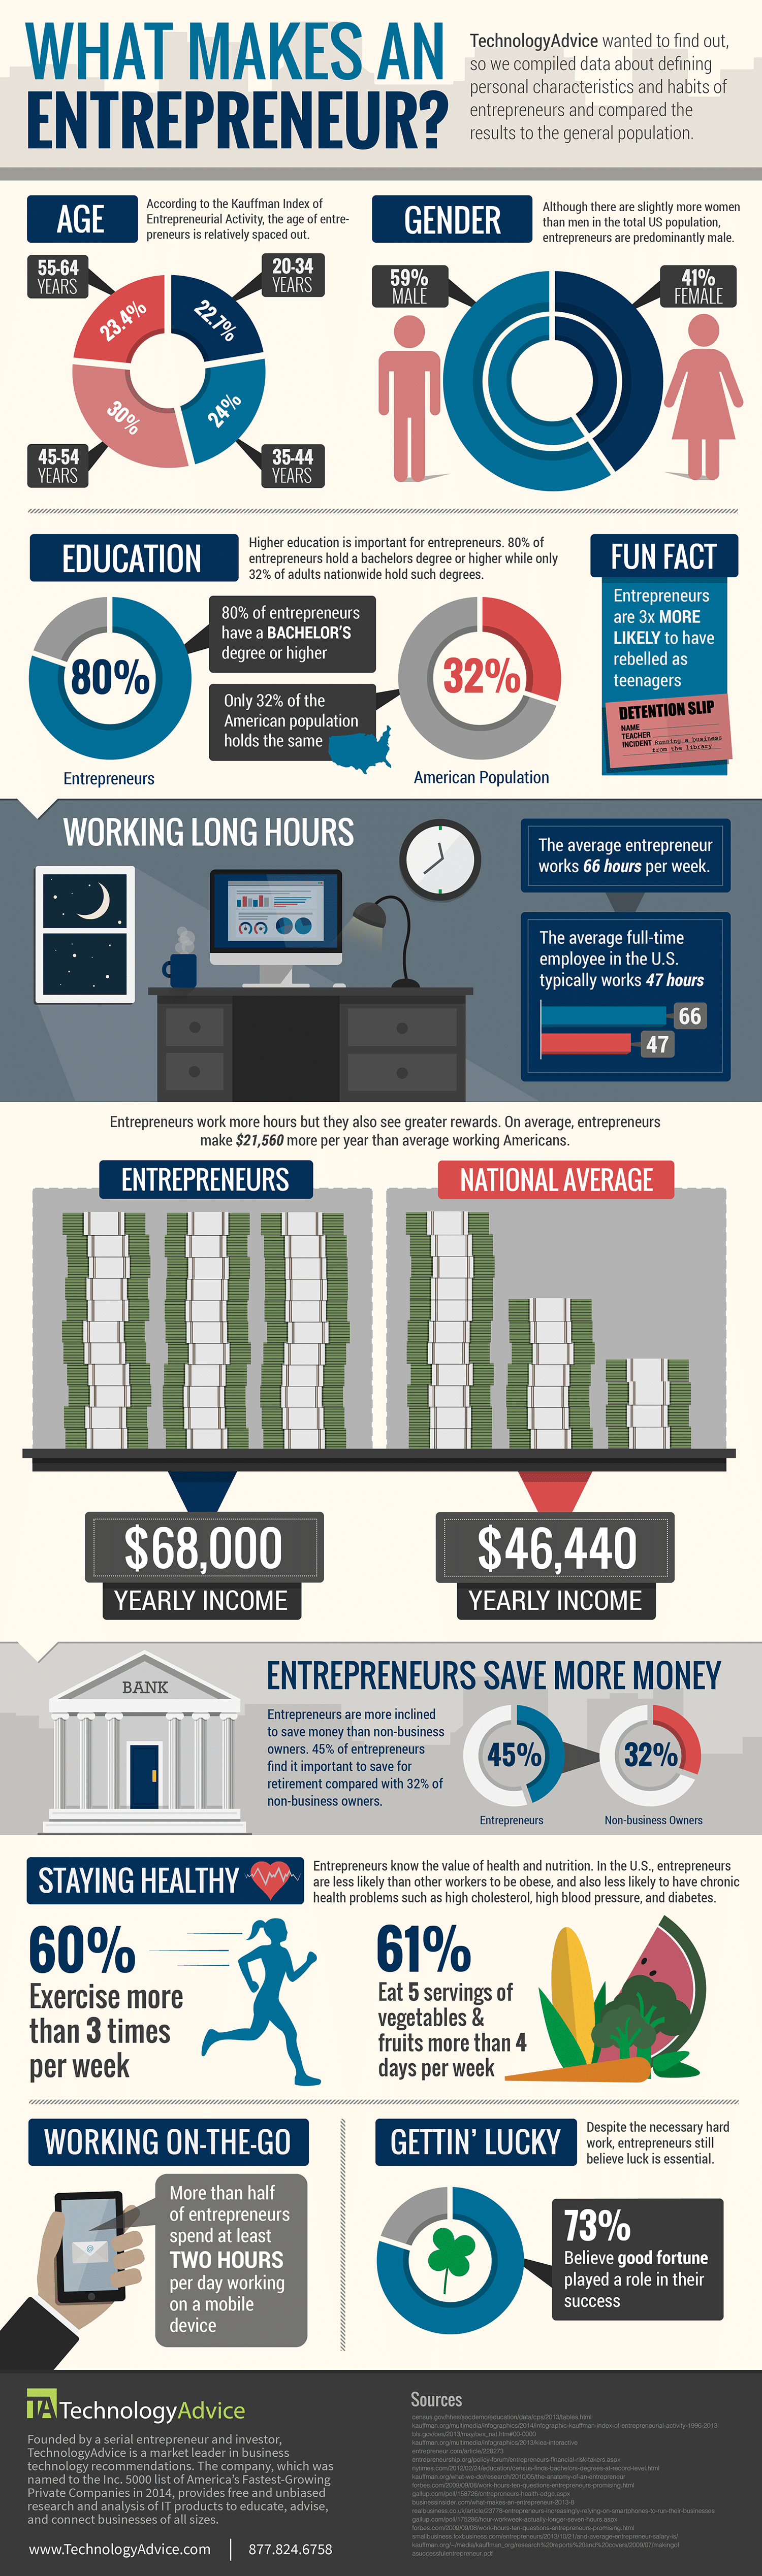 what-makes-an-entrepreneur-infographic